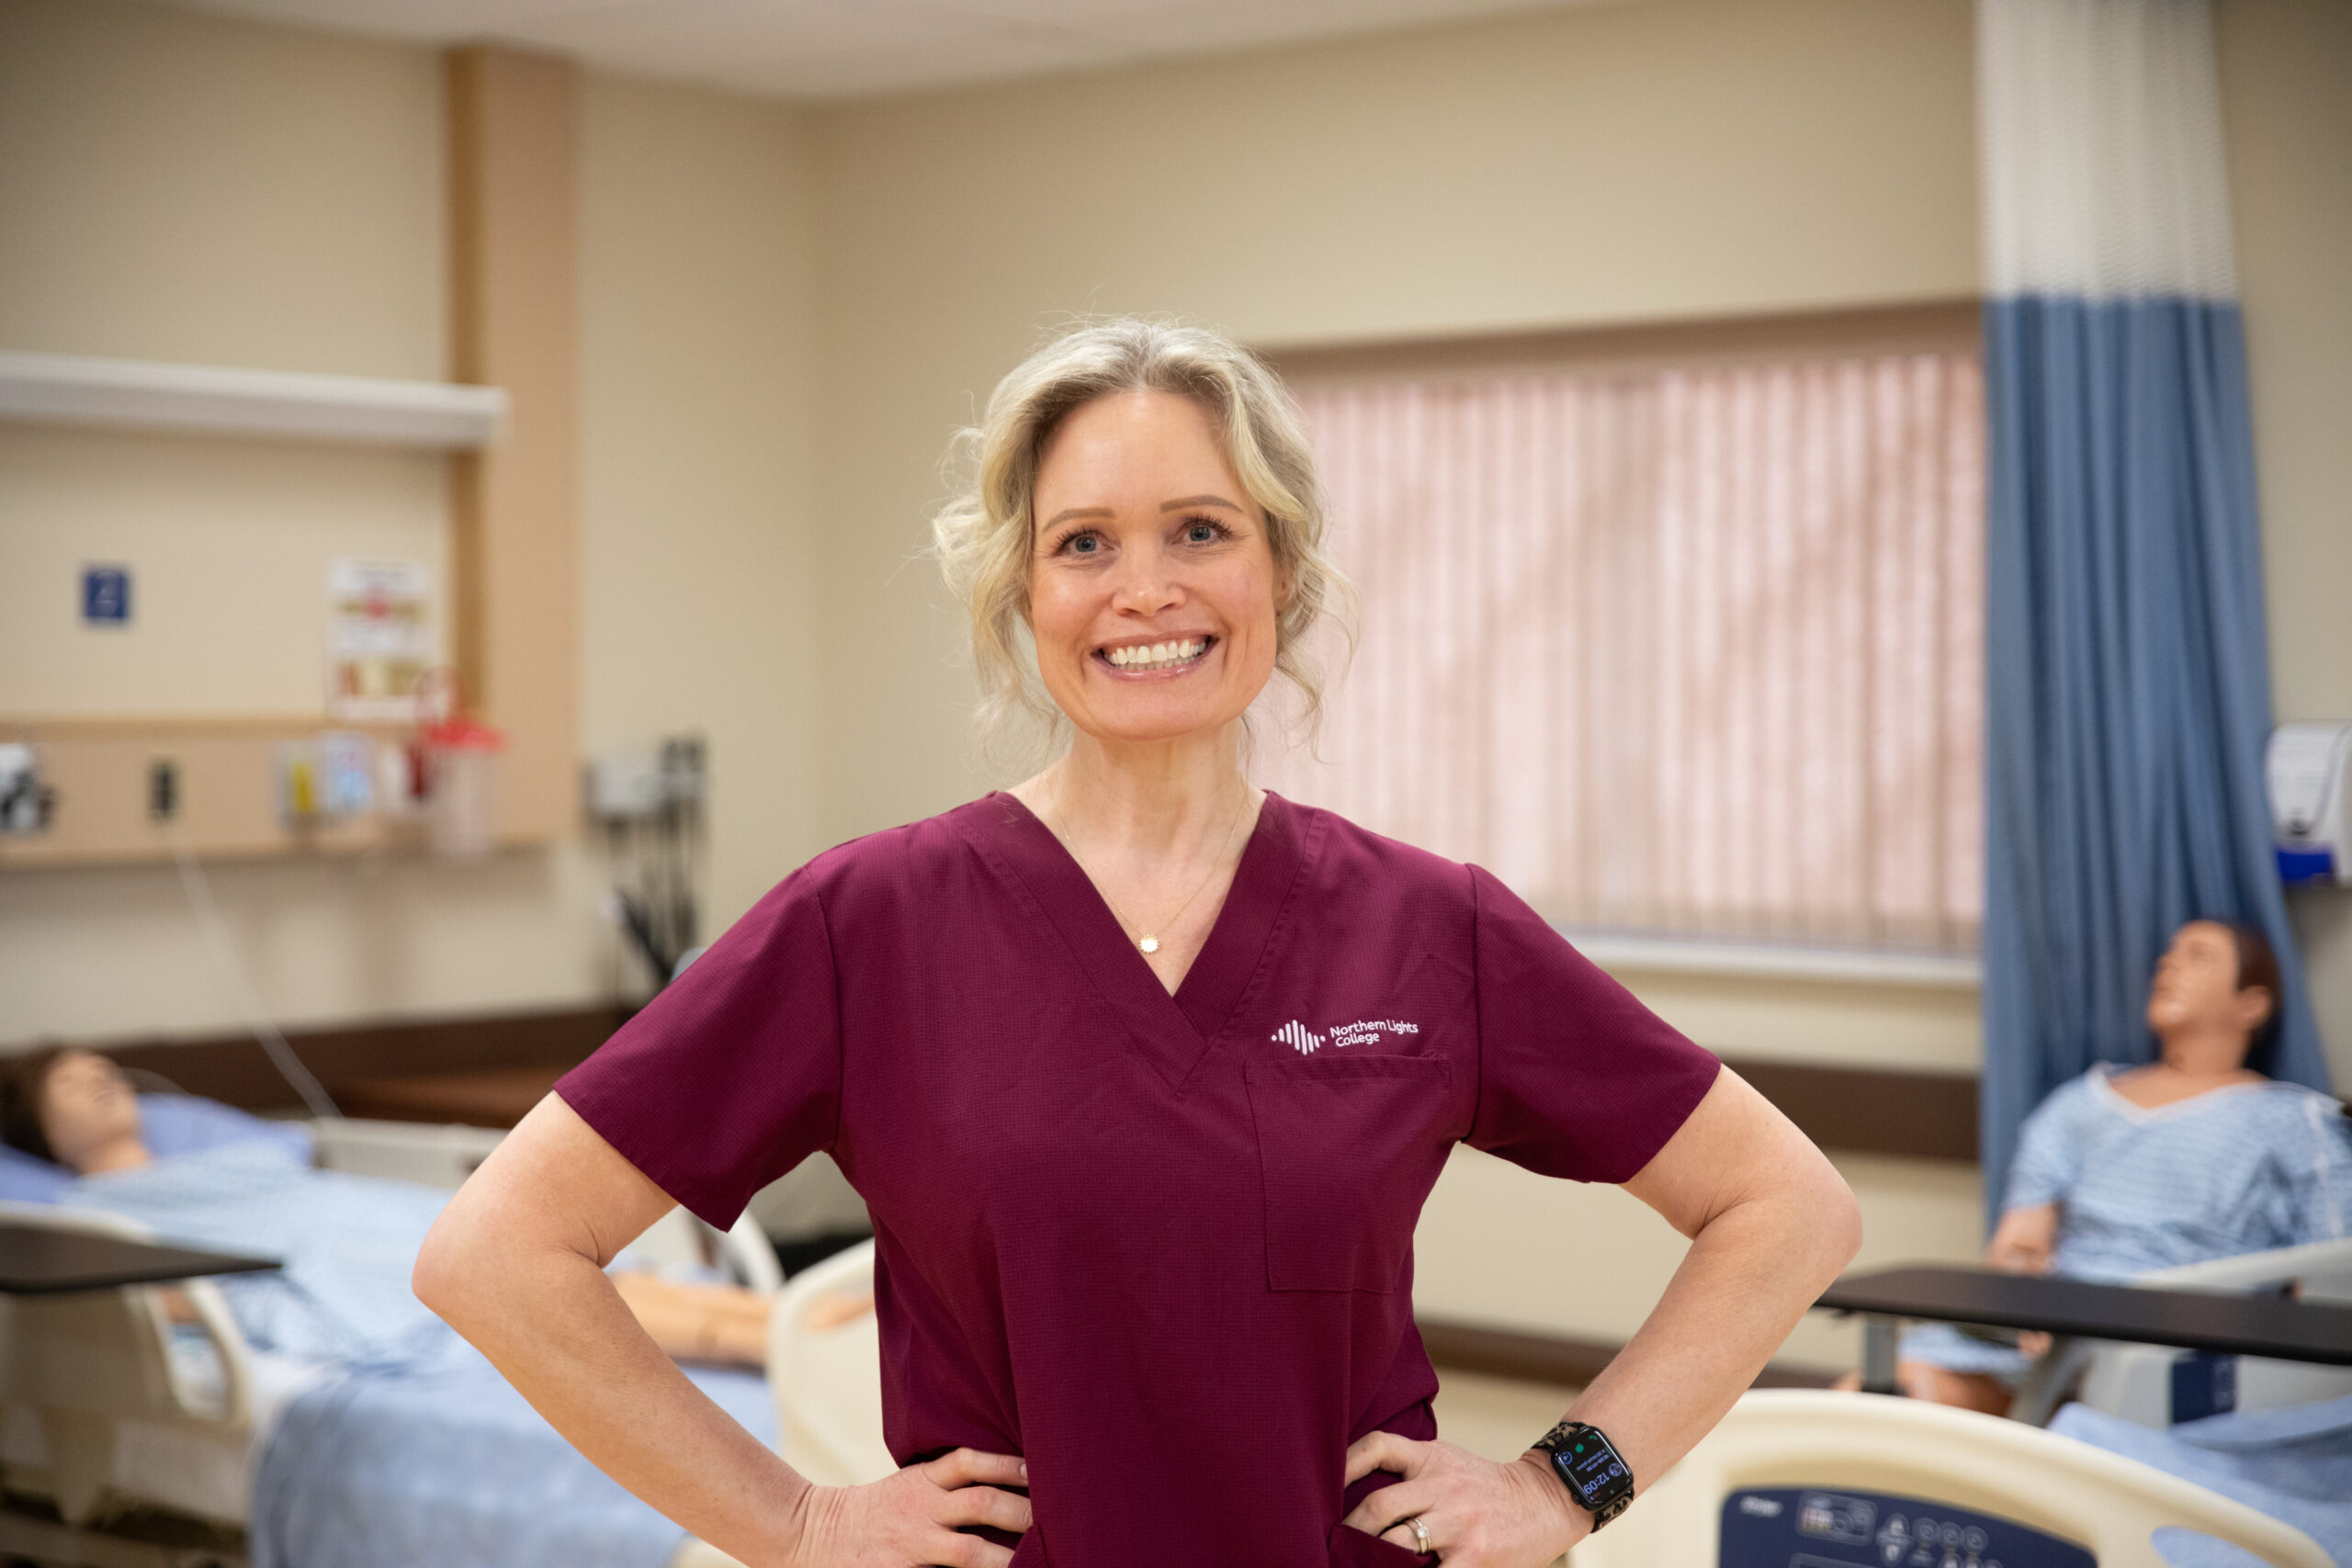 April Trasy stands in the nursing lab wearing burgundy scrubs